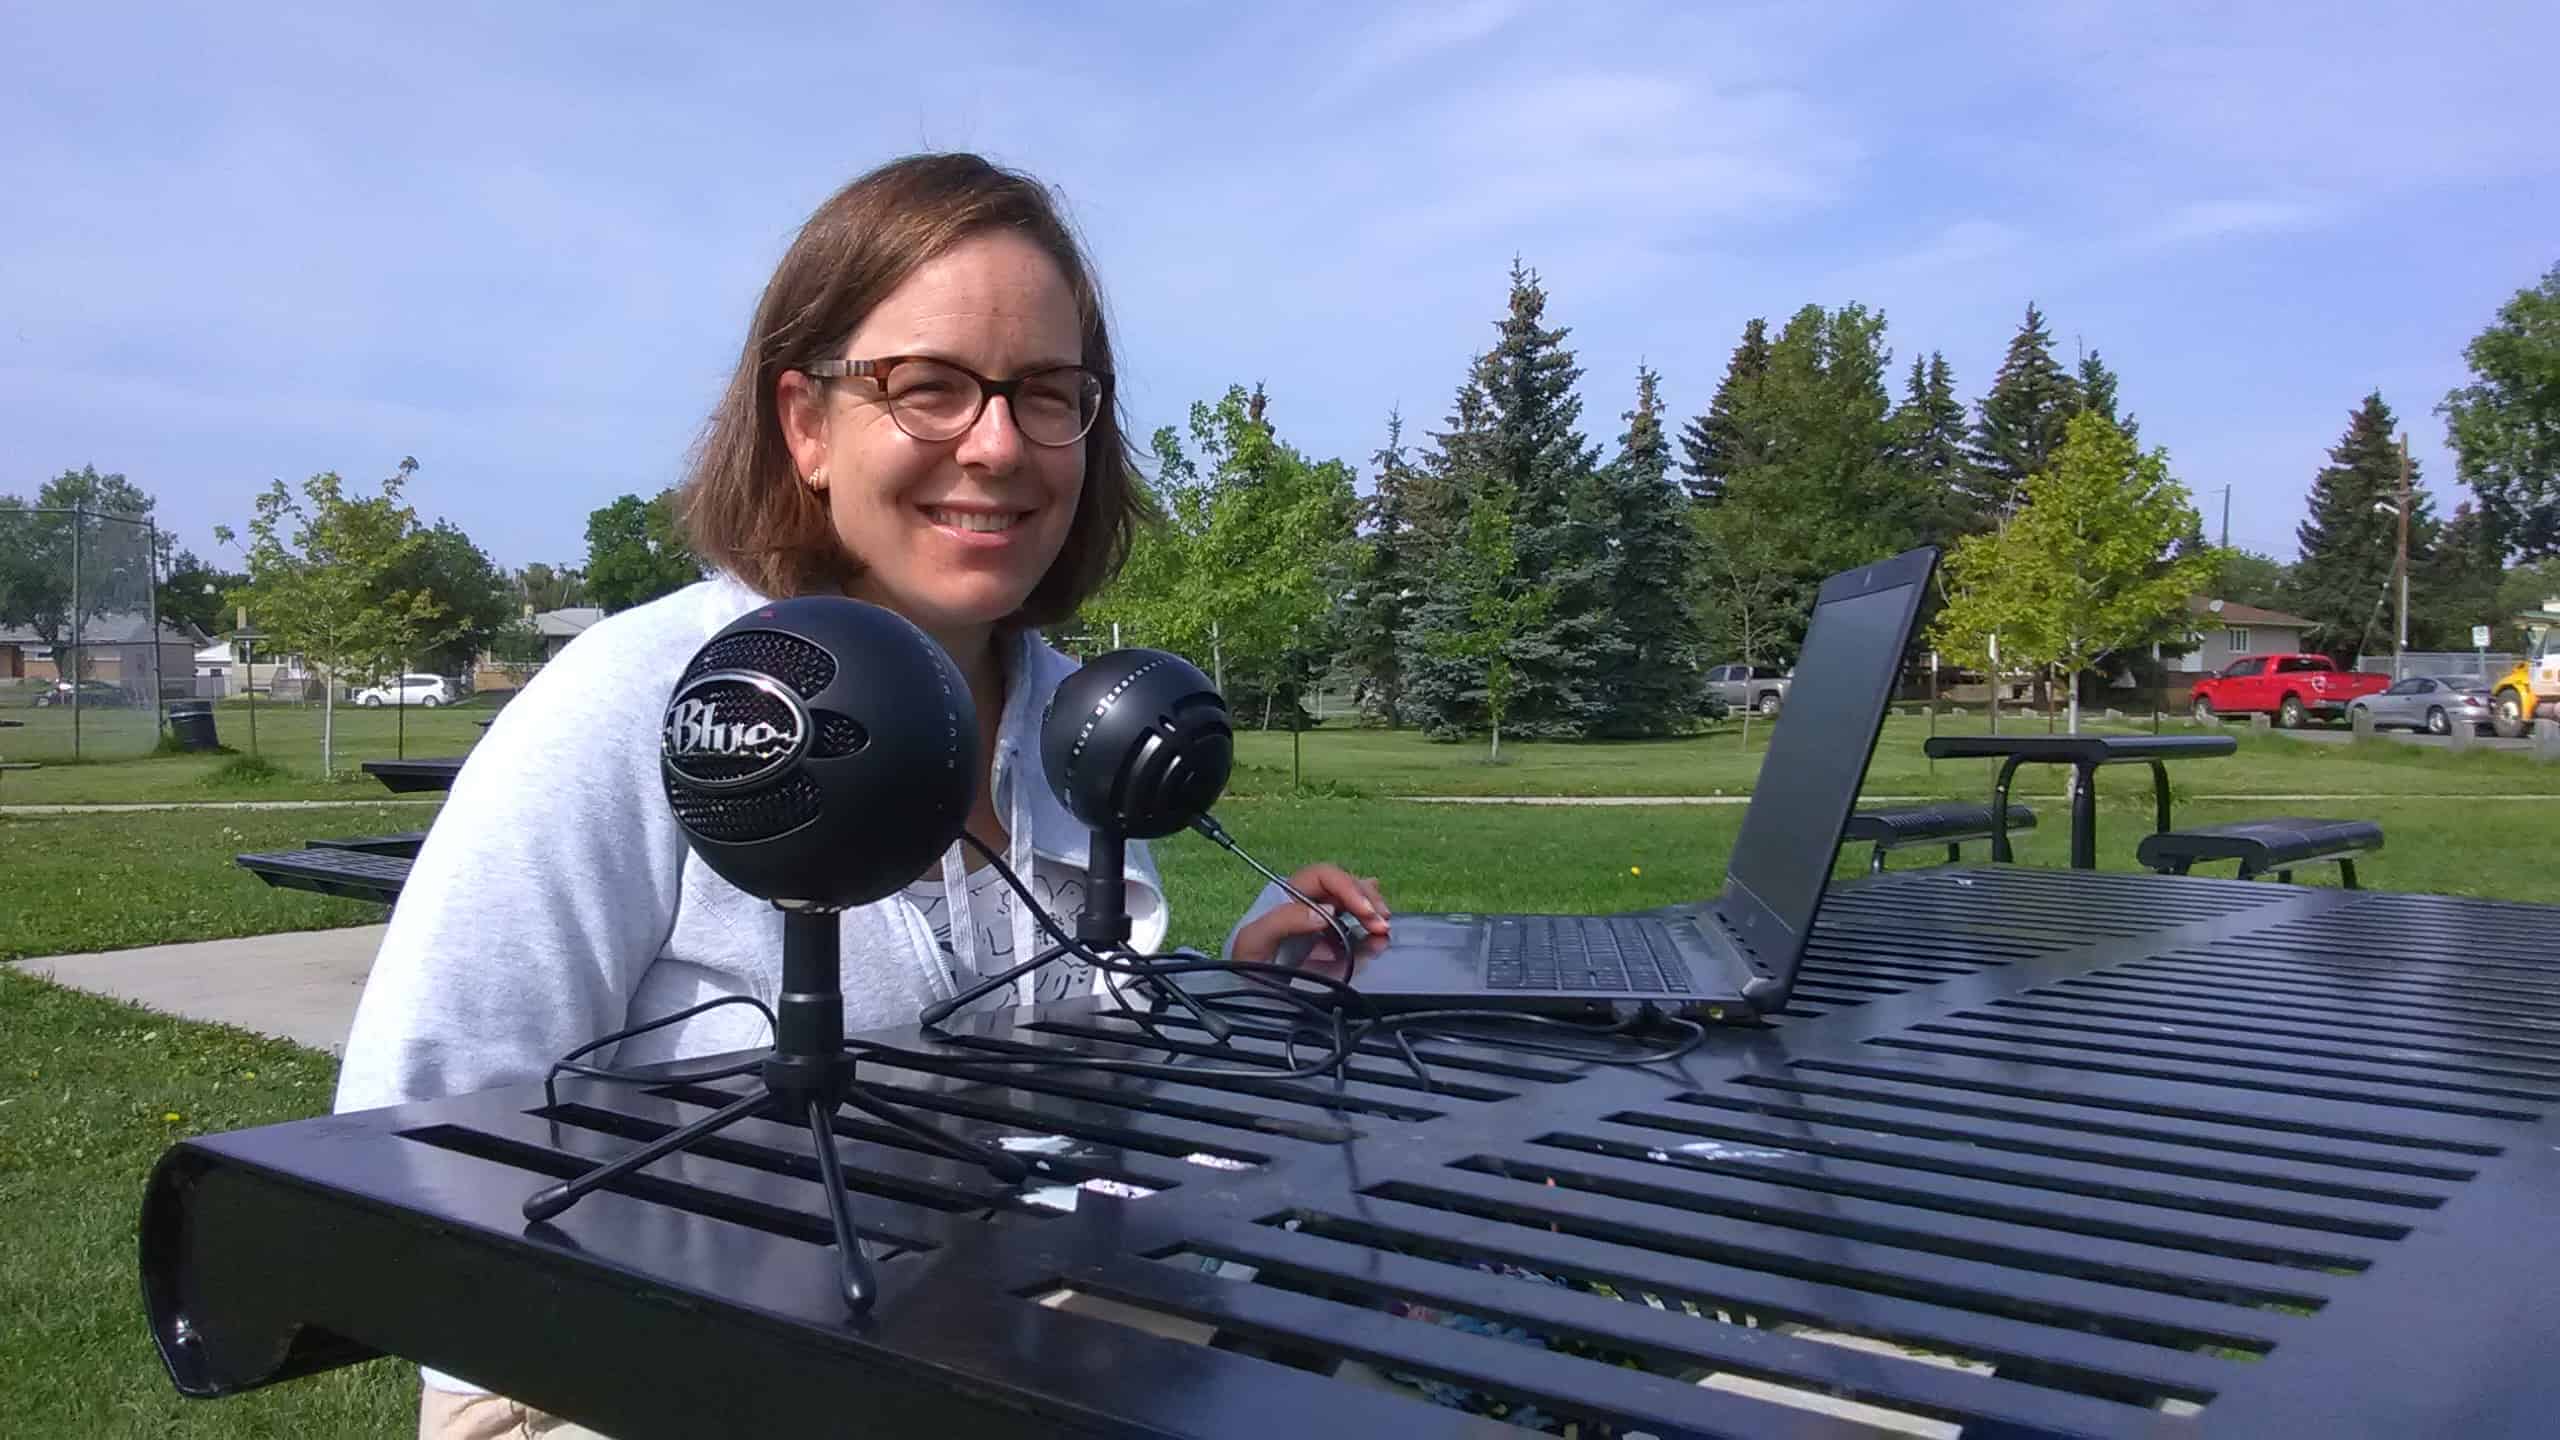 Podcast aims to help new Edmontonians